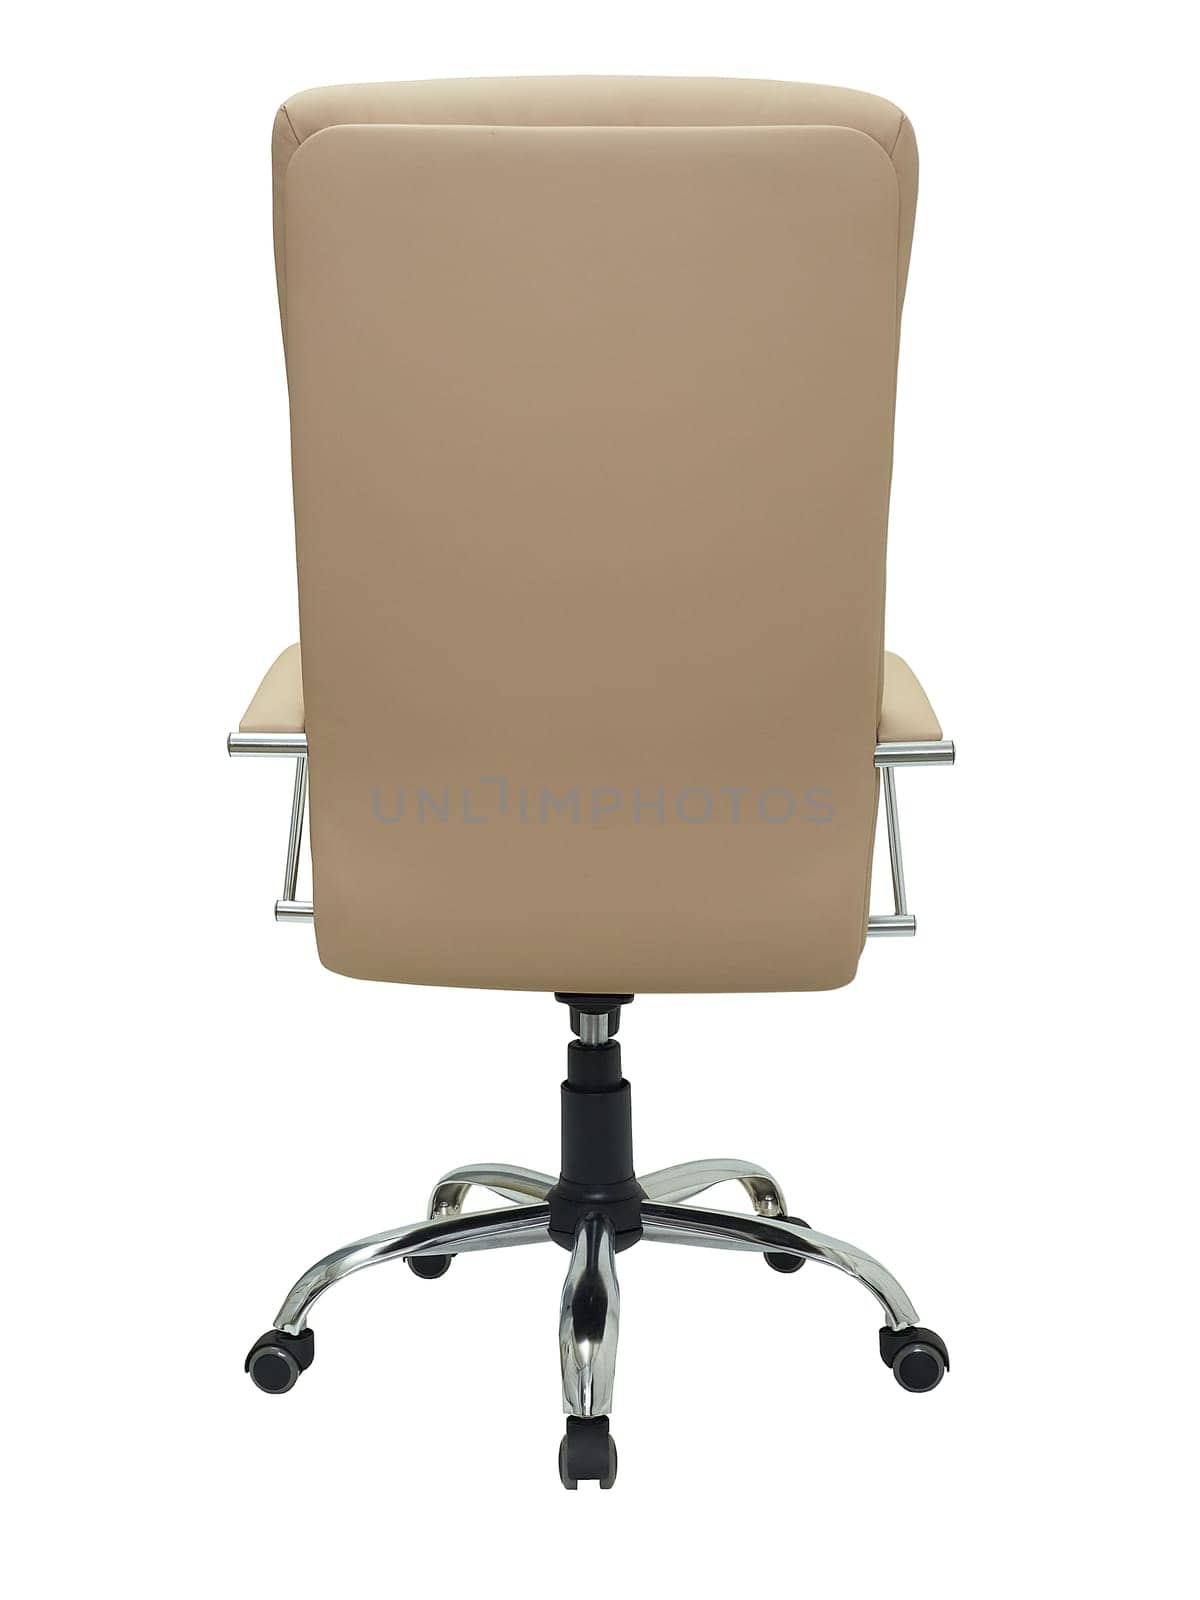 beige office armchair on wheels isolated on white background, side view. furniture in minimal style